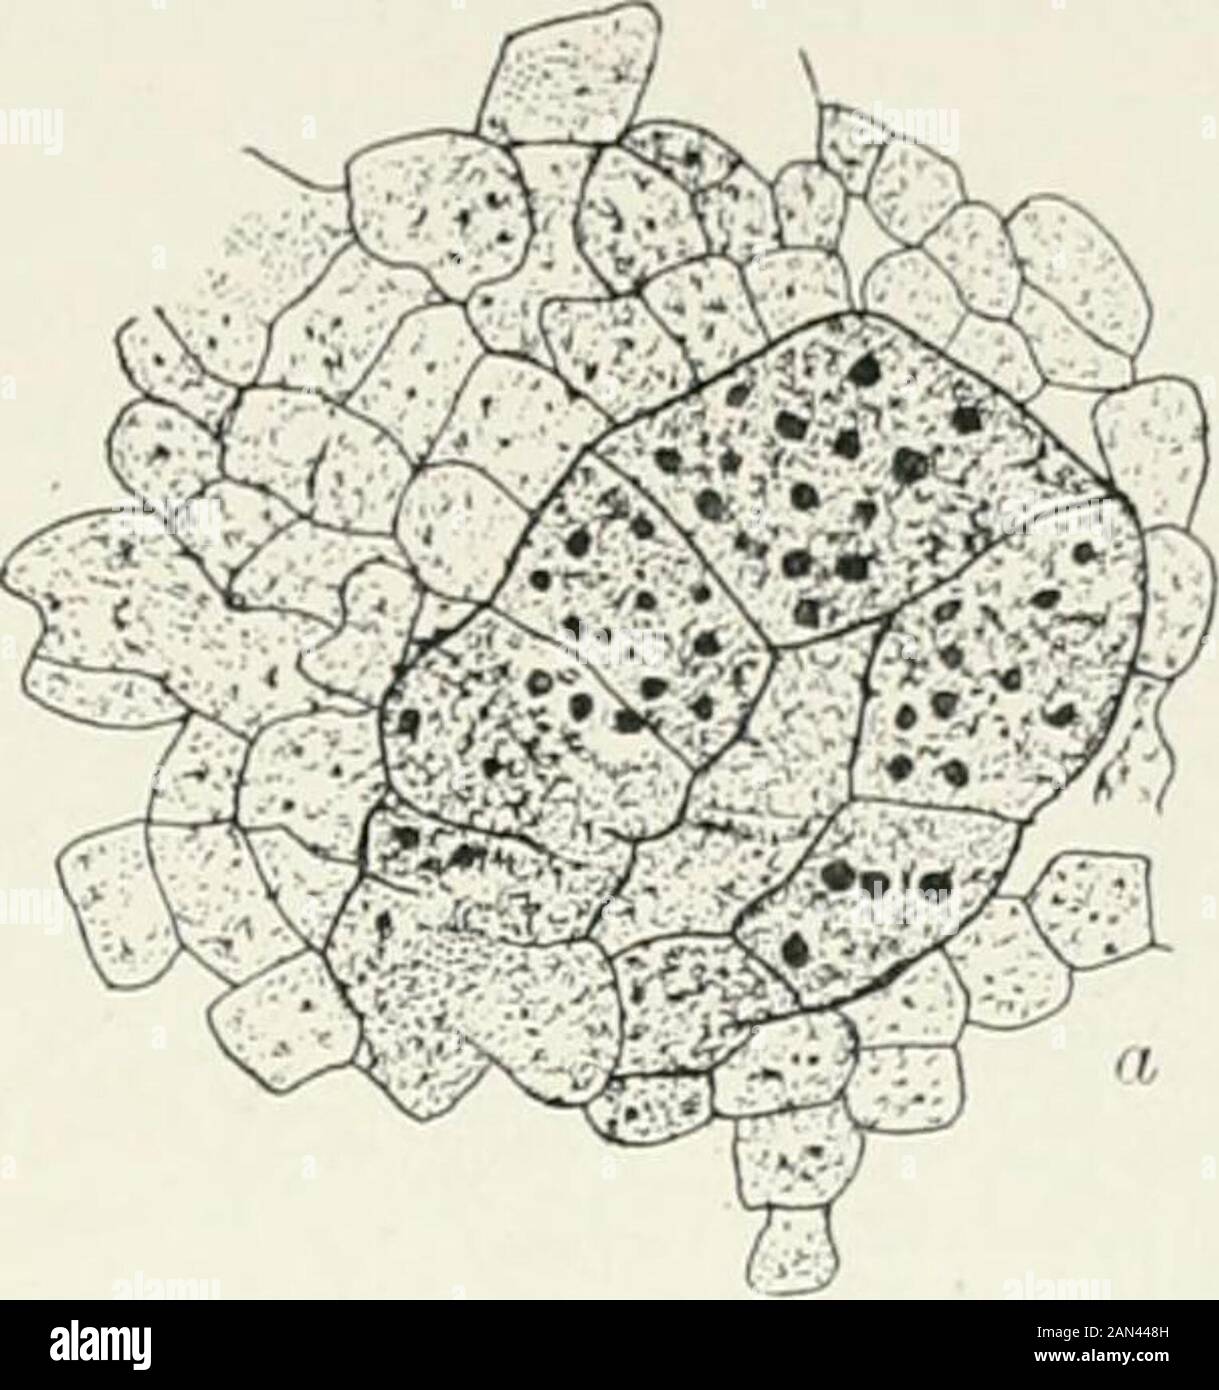 Fungi, Ascomycetes, Ustilaginales, Uredinales . Fig. 76. Ascobolusfurfuraeeus Pers.; a. young archicarp, X750; b. rather olderspecimen showing pores between the cells, x 625 ; after Welsford. fi iurth from the apex (Welsford), enlarges, buds out ascogenous hyphae andfunctions as the oogonium. Those near the base form a stalk, and thosetowards the apex may be regarded as constituting a now functionlesstrichogyne. The cells on each side of the oogonium communicate with it by meansof pores (fig. j6 b). Additional nuclei pass into it from both the stalk andterminal cells, and Welsford has observed Stock Photo